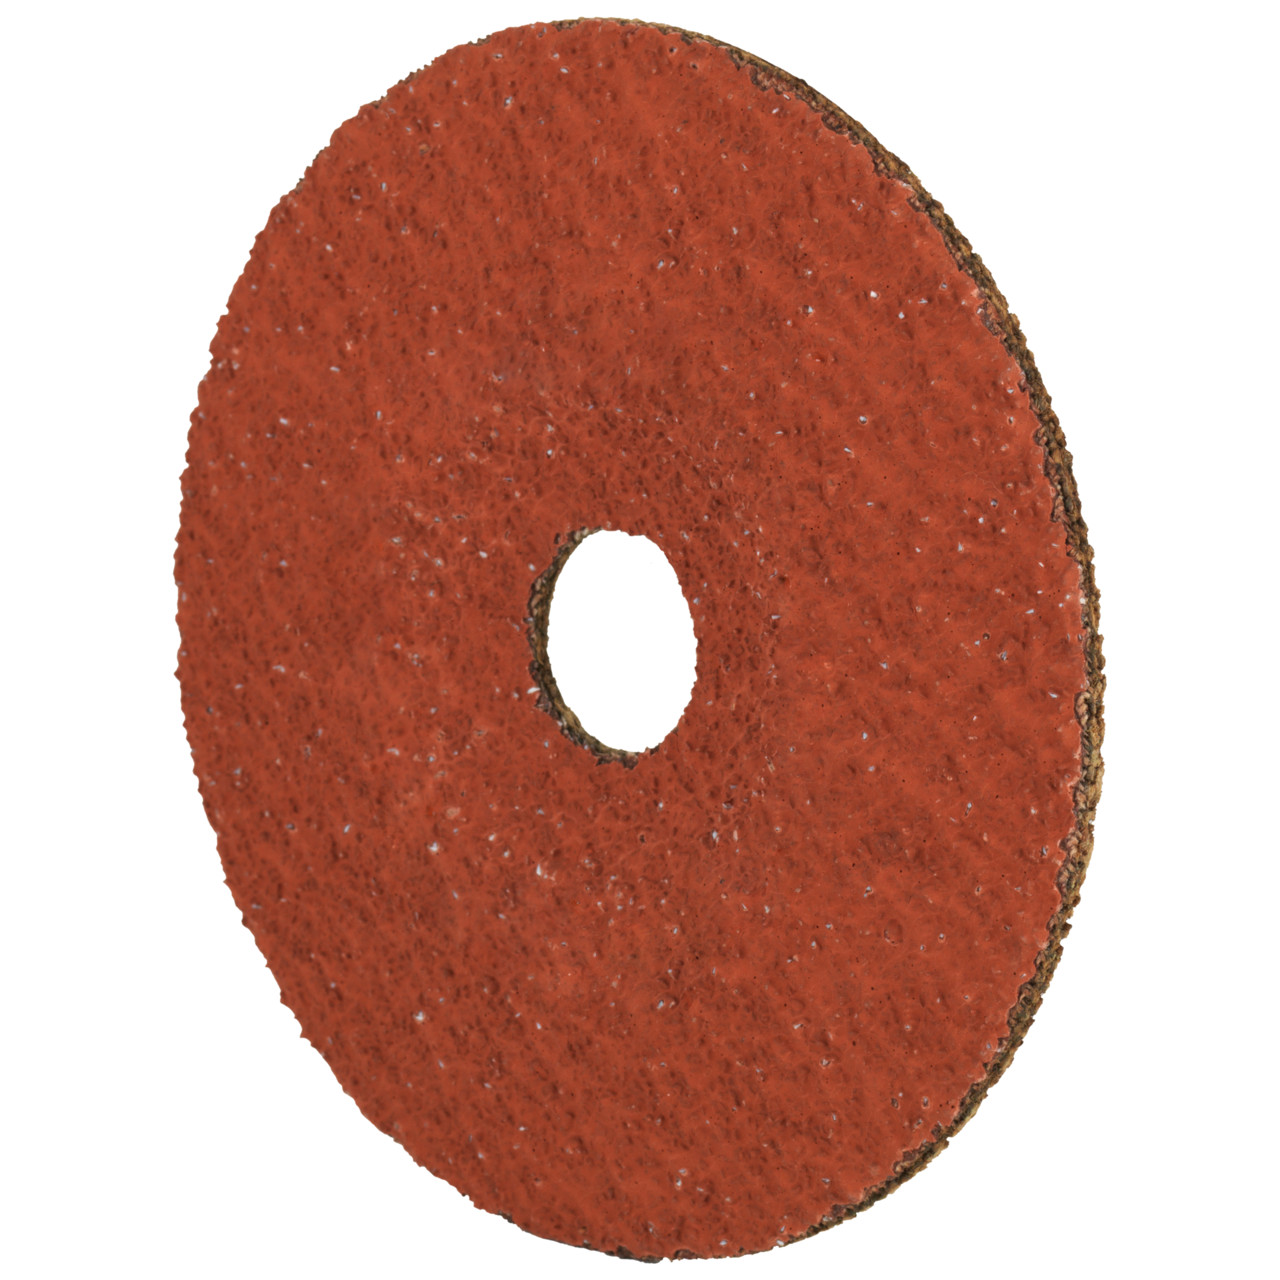 Tyrolit CA-PA93 N NATURAL FIBRE DISC DxH 180x22 For steel and stainless steel, P36, form: DISC, Art. 712269